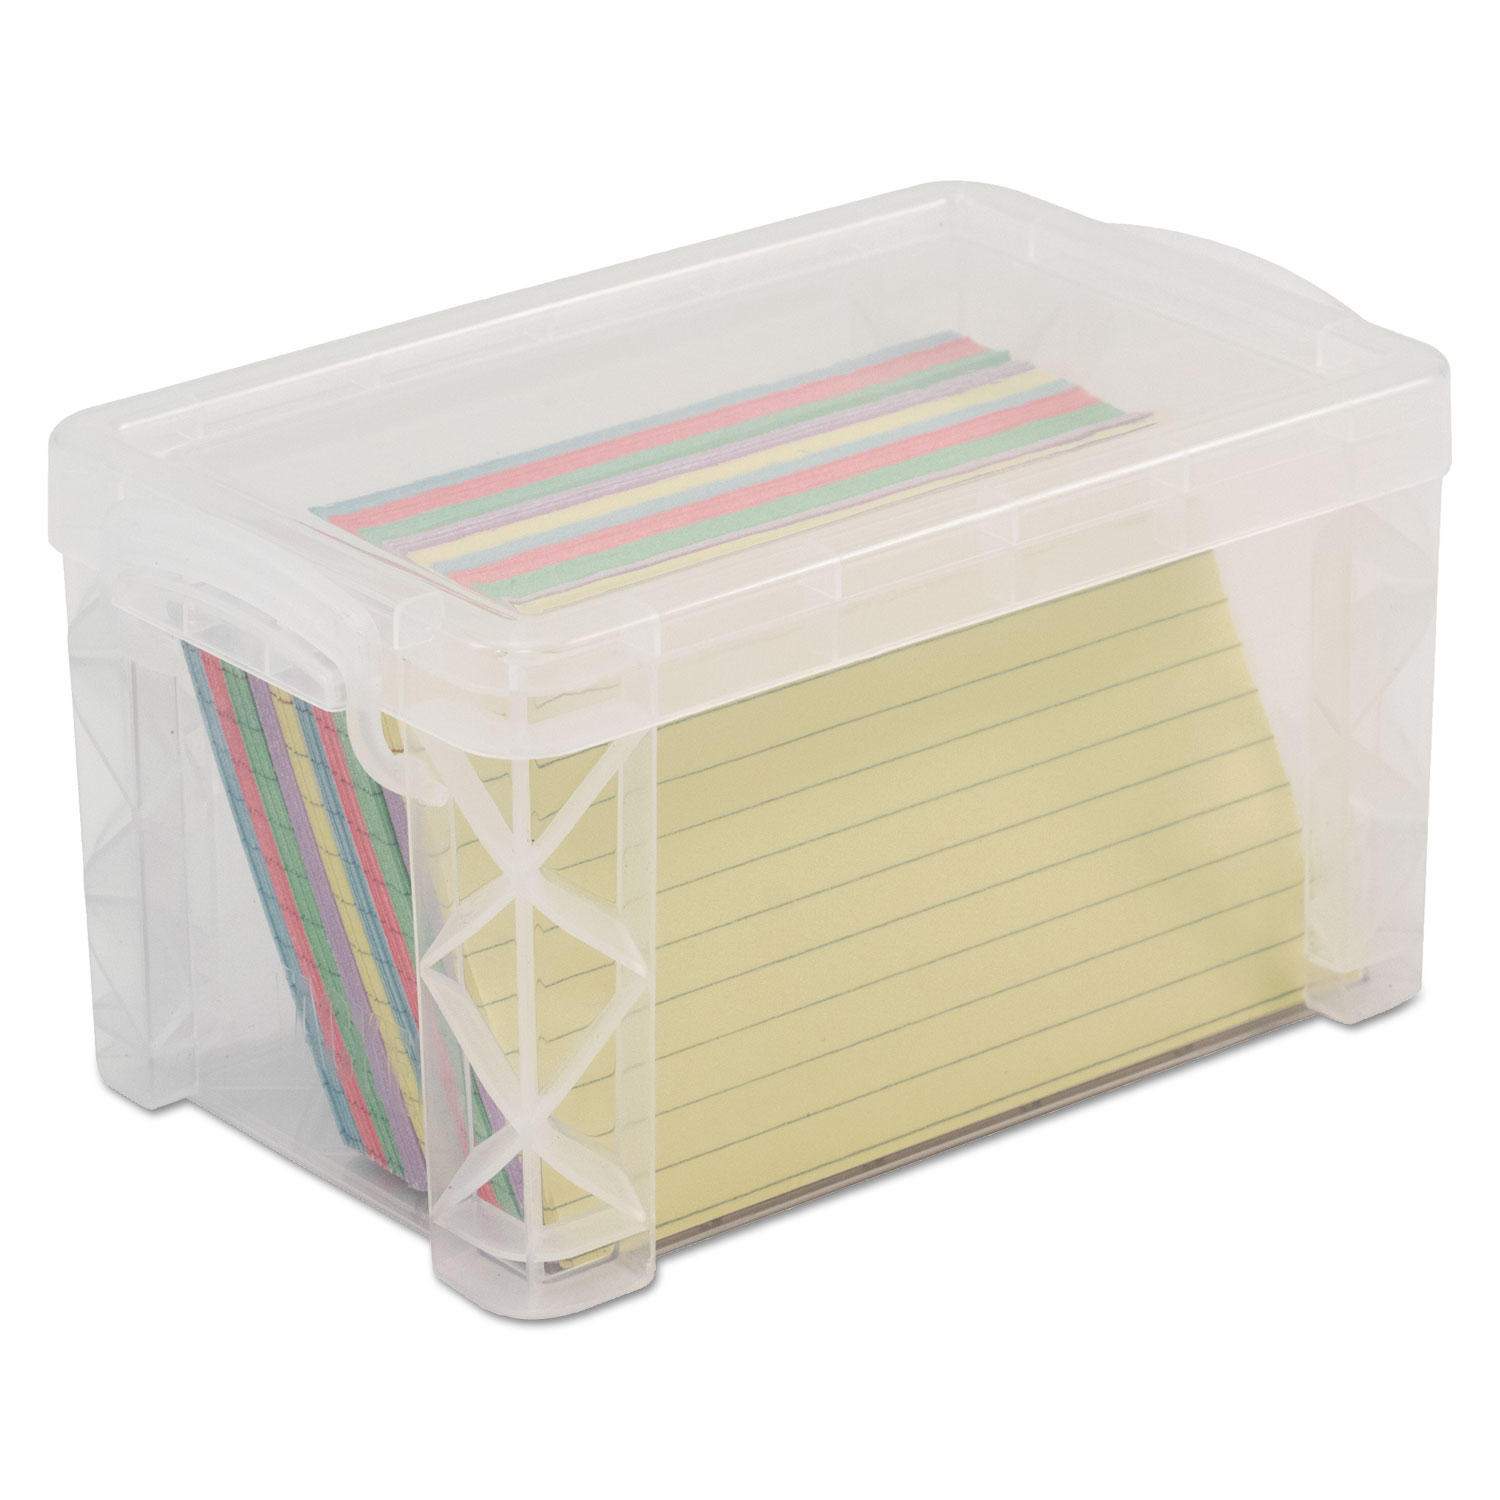  Advantus 40307 Super Stacker Storage Boxes, Hold 400 3 x 5 Cards, Plastic, Clear (AVT40307) 